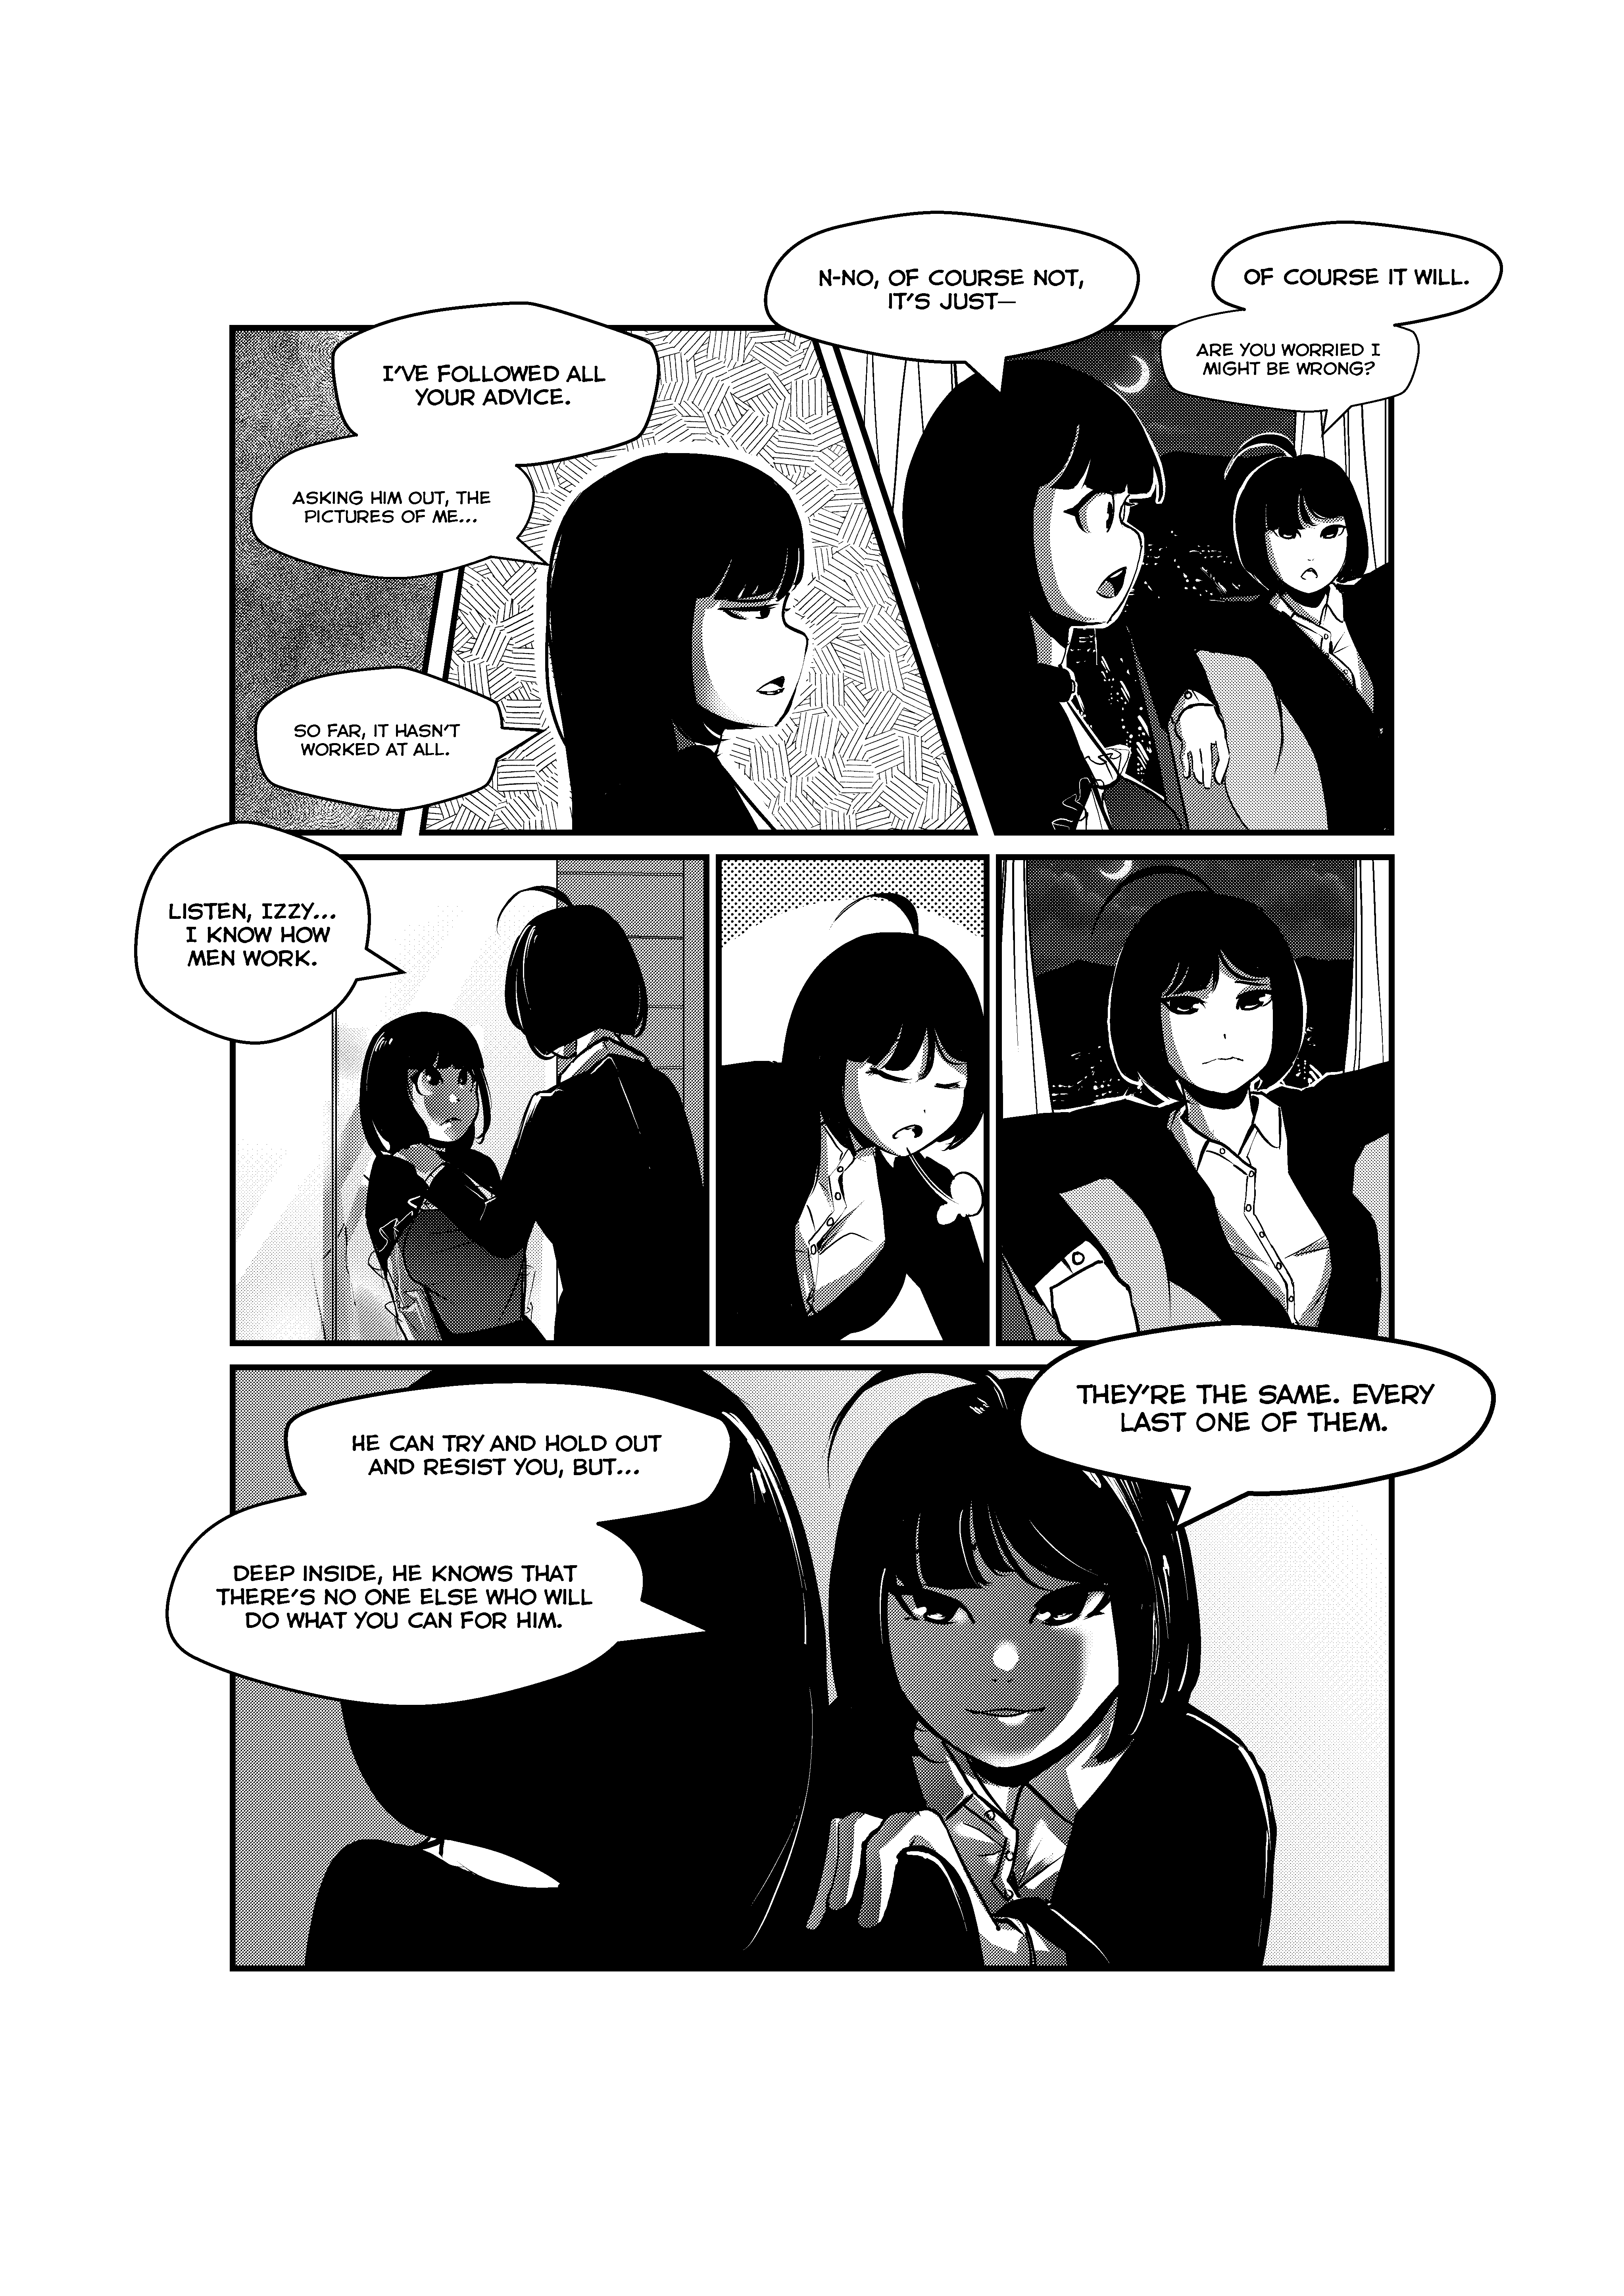 Opposites In Disguise - 17 page 20-5b51f63f